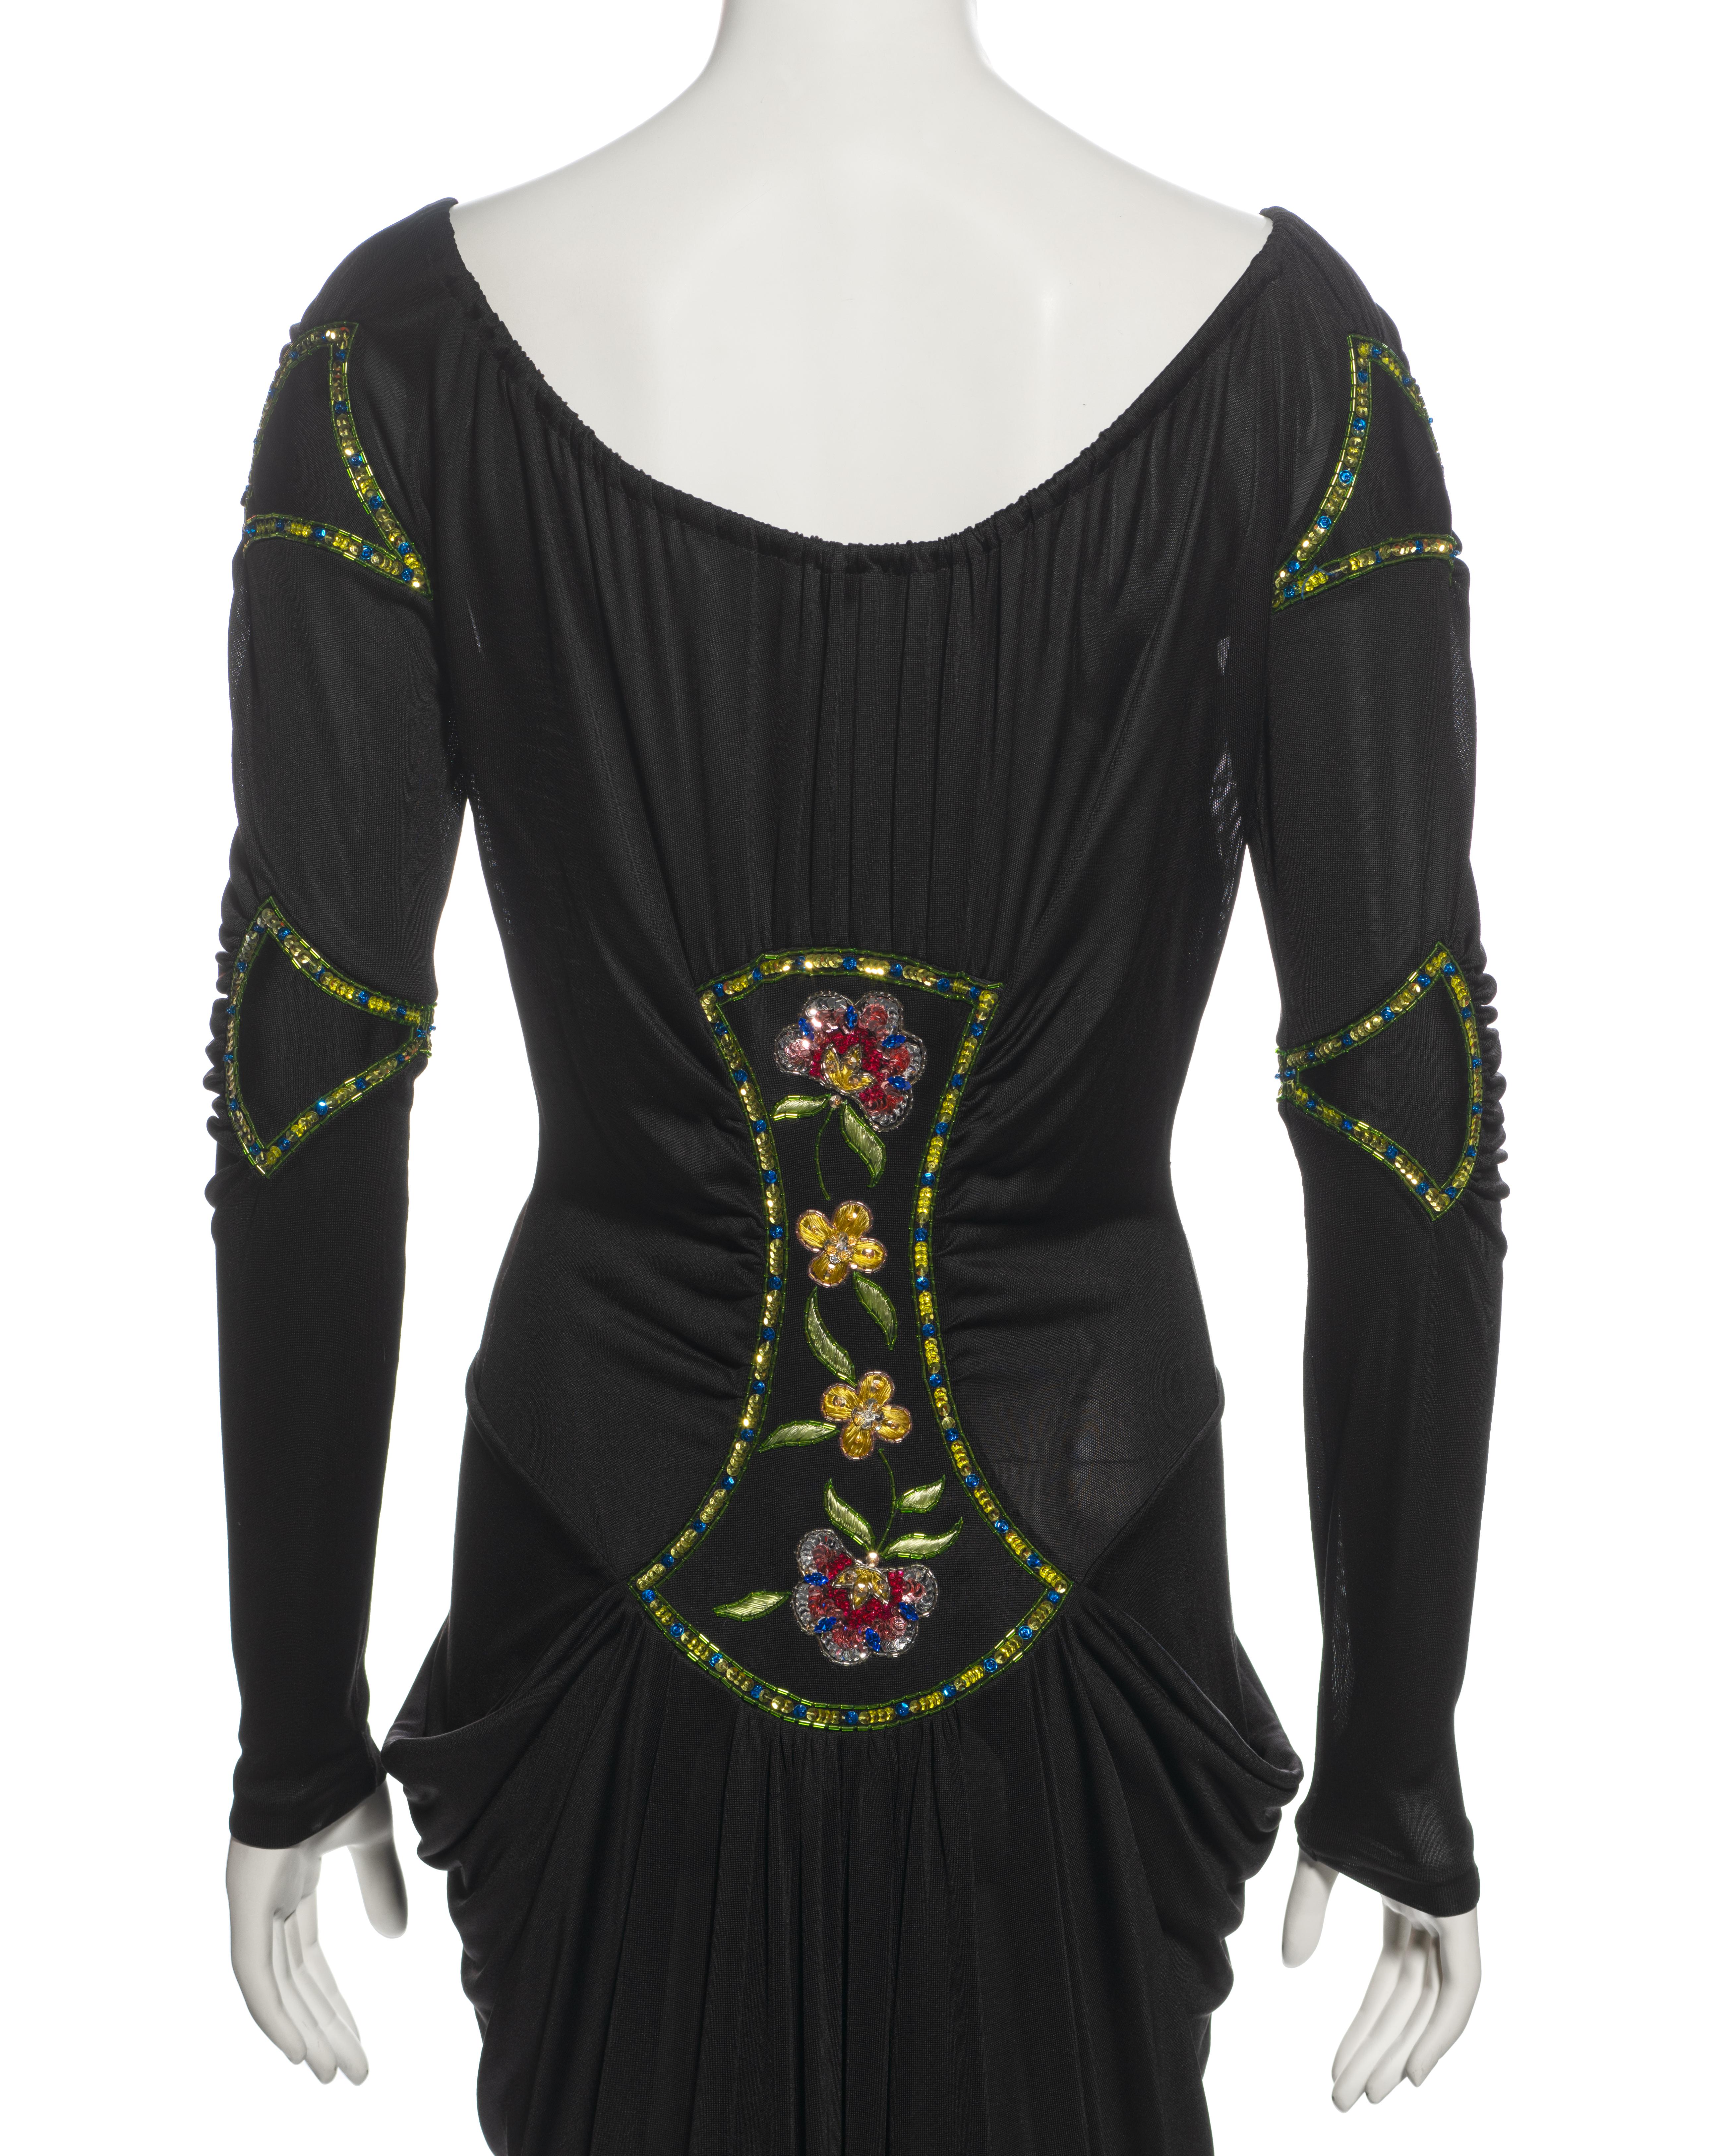 Christian Dior by John Galliano Black Viscose Embellished Draped Dress, ss 2002 For Sale 10